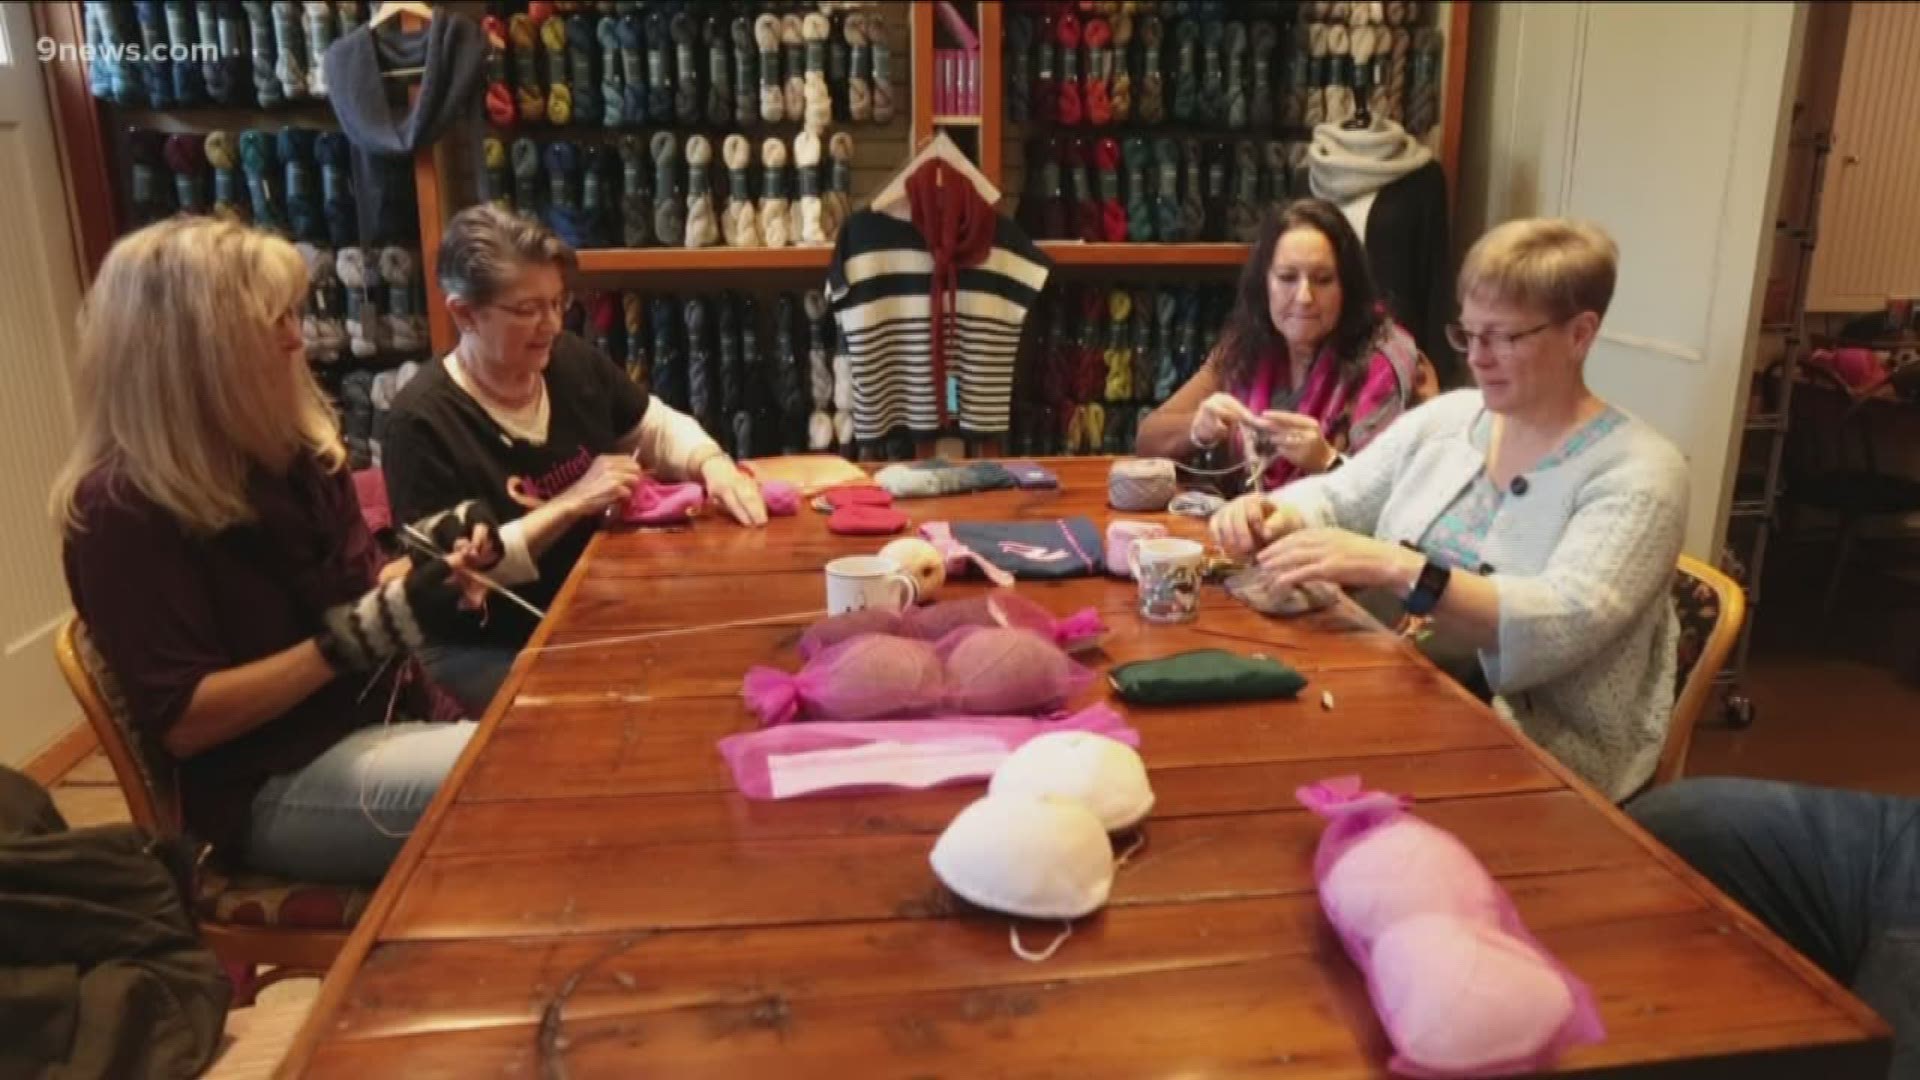 This week in our Warrior Way series, we visit the Colorado Knitted Knockers, and see how they're making a difference one stitch at a time.